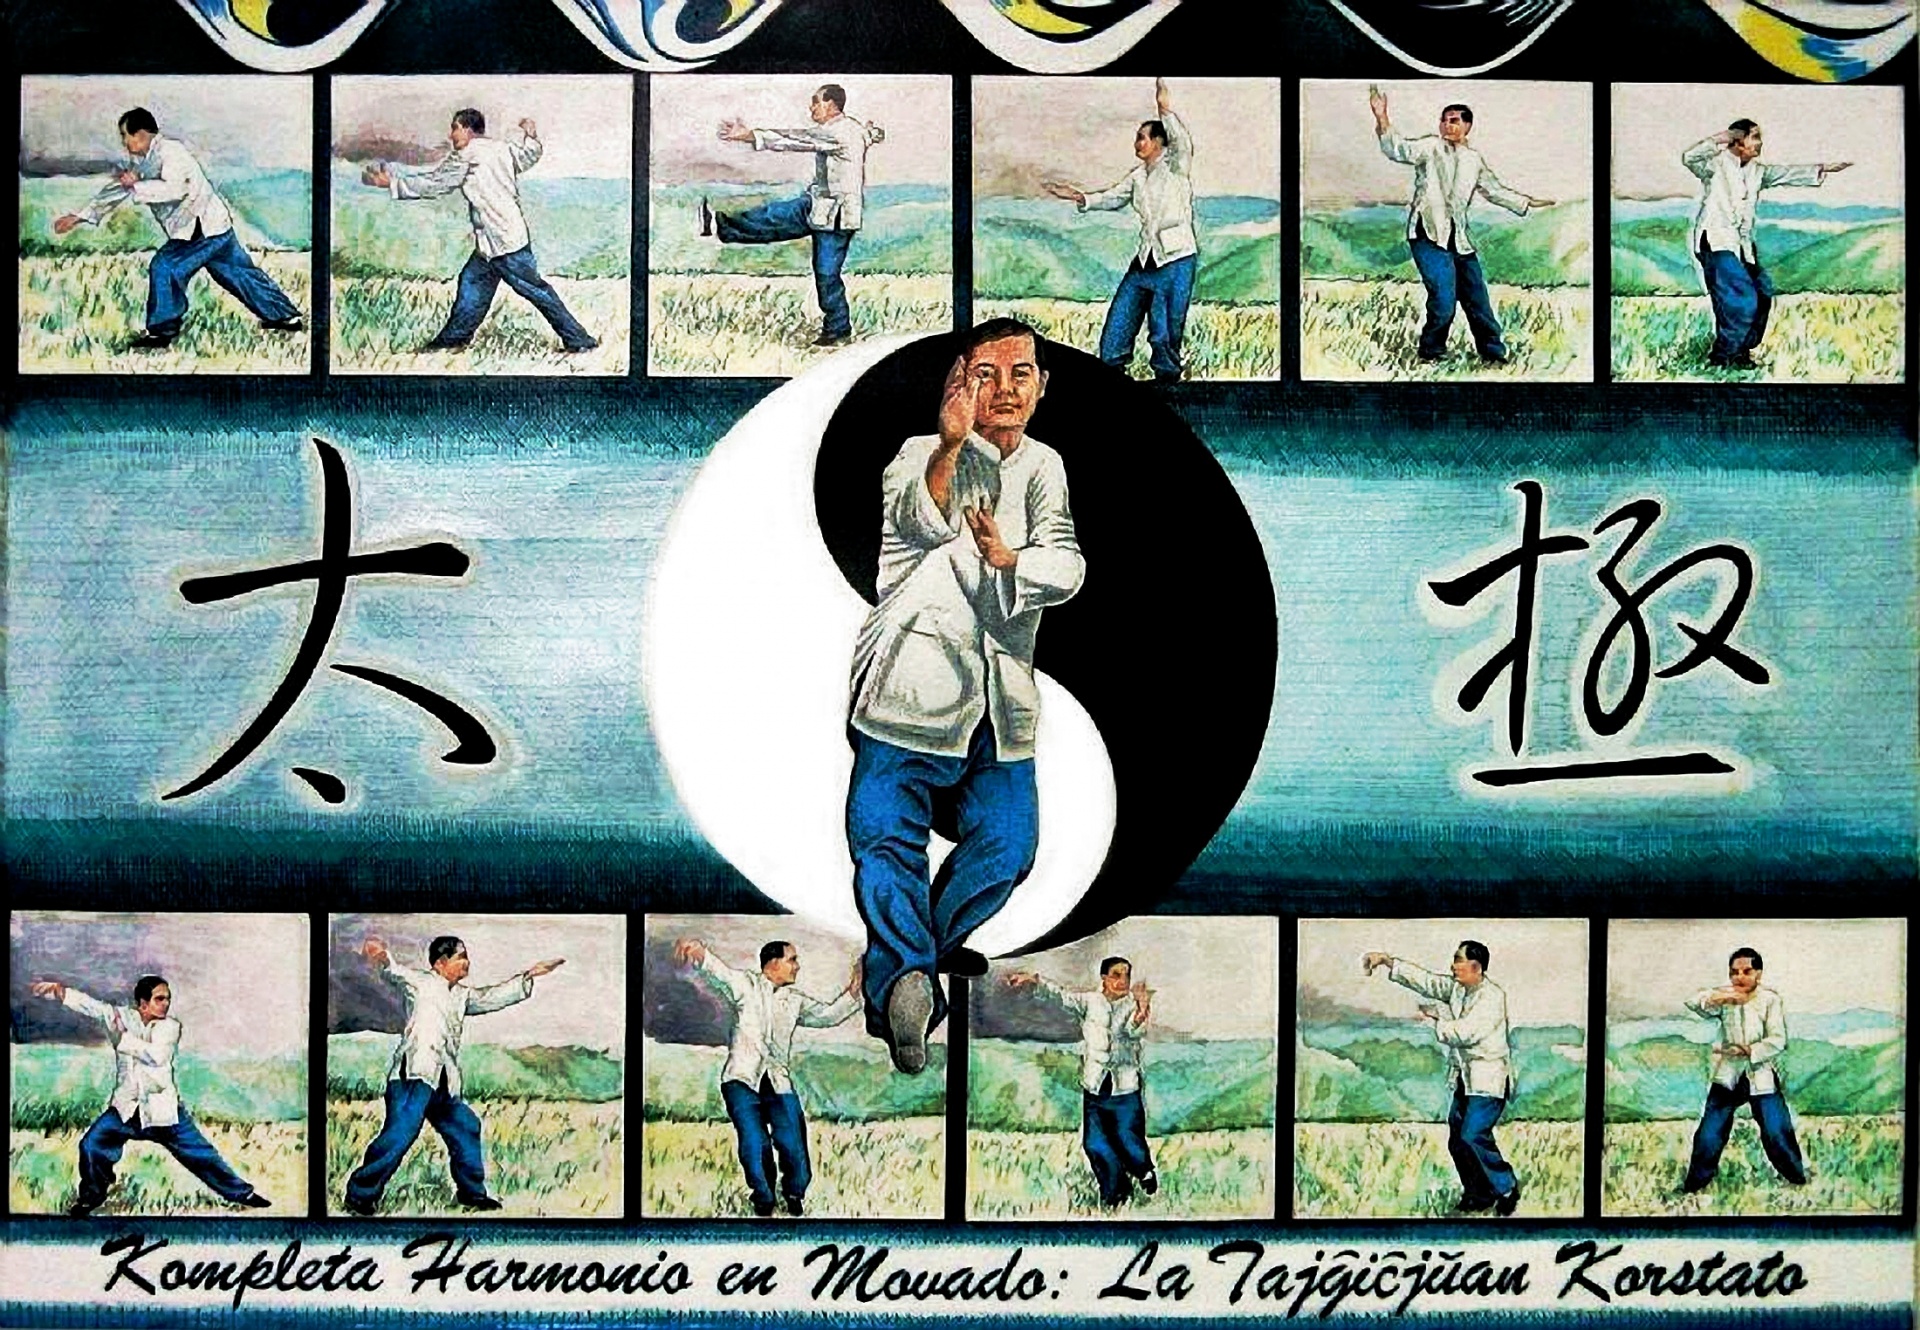 gouache painting,traditional media drawing,taiji,harmony,esperanto,martial arts,tai chi - compete harmony in motion,free pictures, free photos, free images, royalty free, free illustrations, public domain